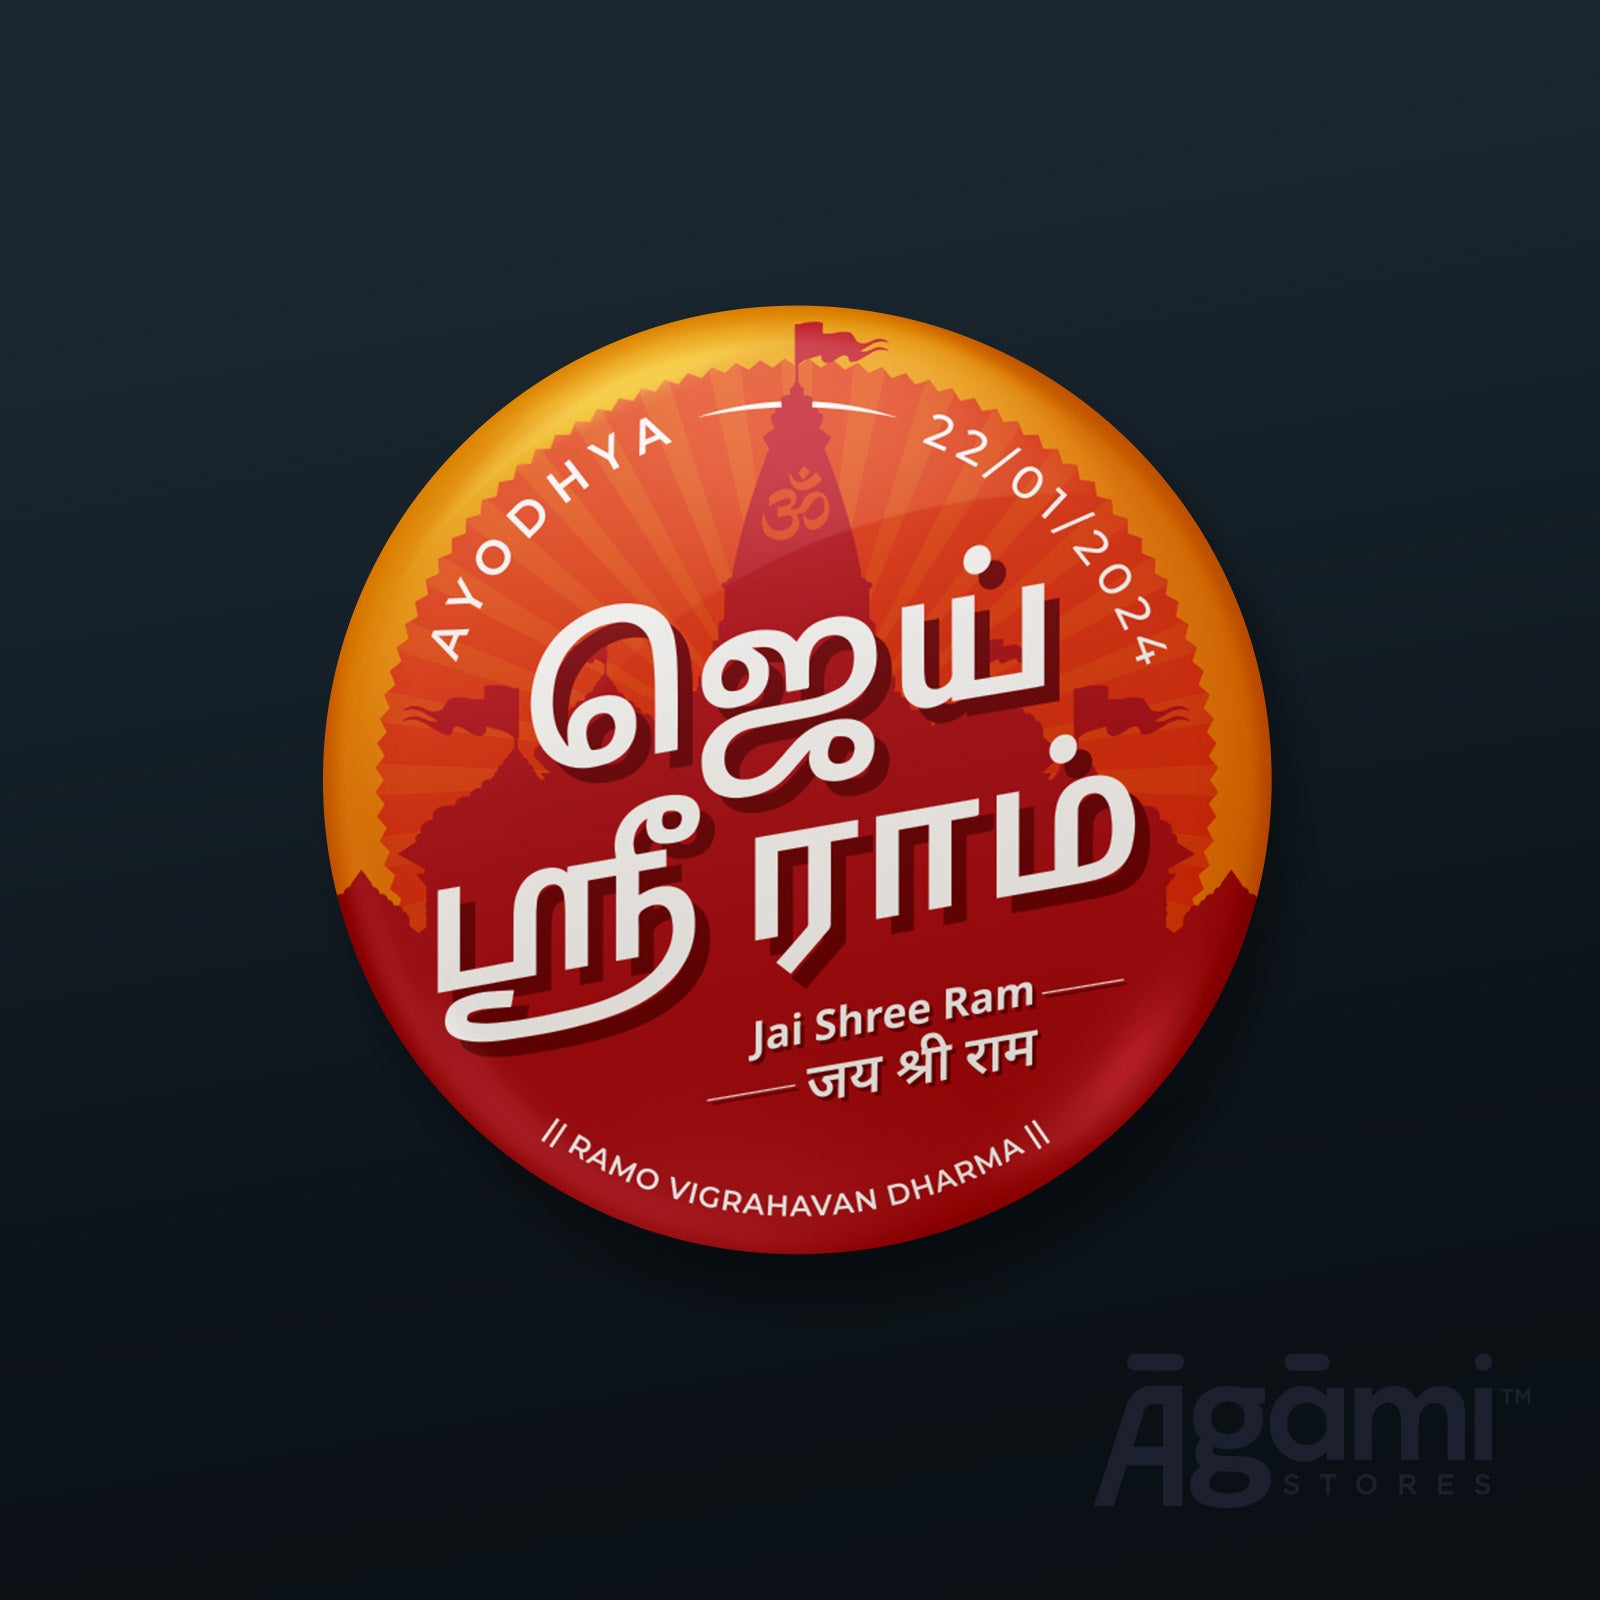 Zee Tamil redesigns to connect deeper with Tamil Nadu ethos